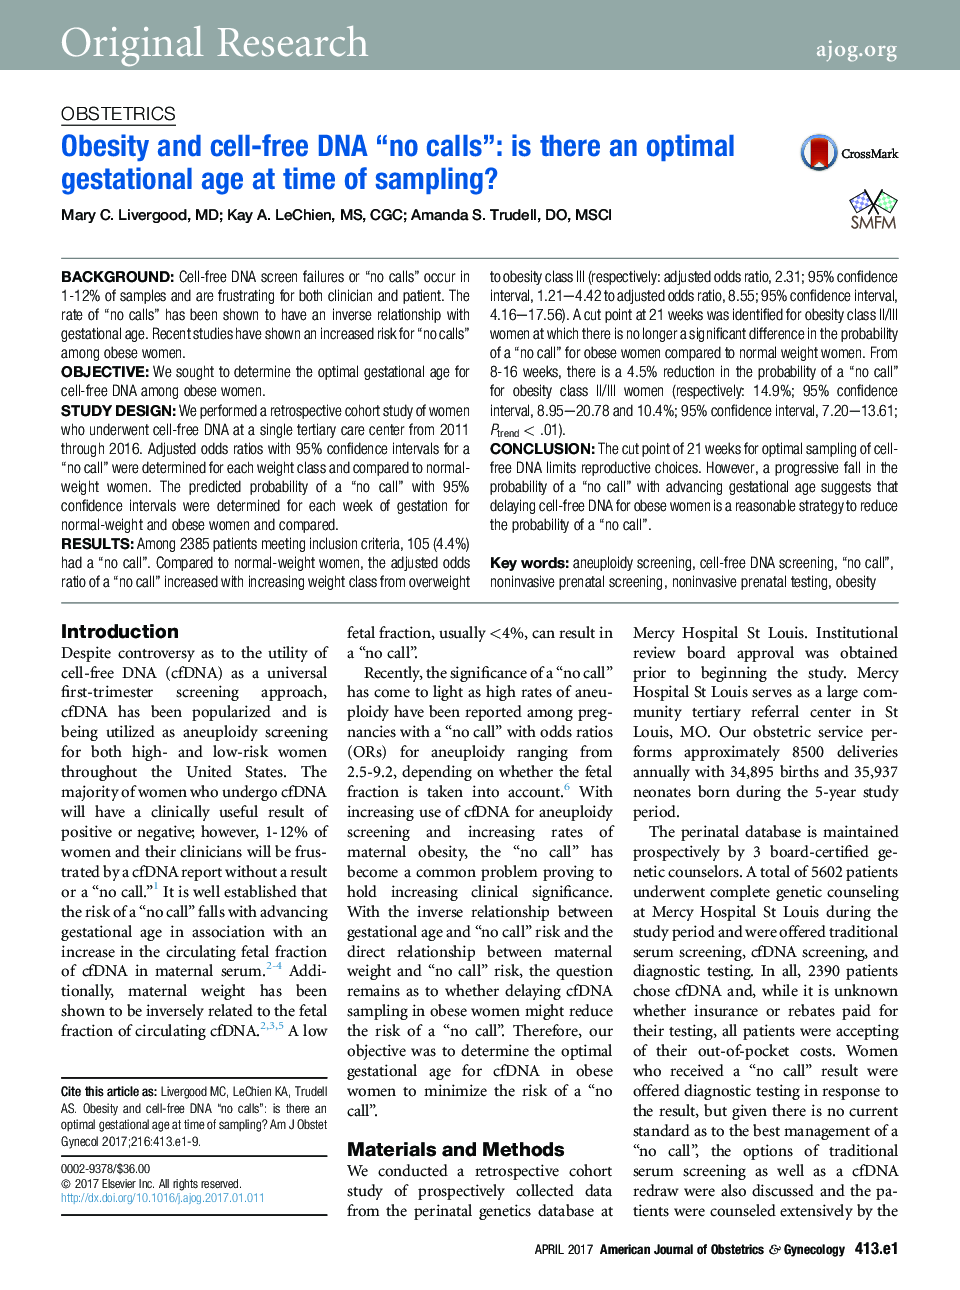 Obesity and cell-free DNA “no calls”: is there an optimal gestational age at time of sampling?